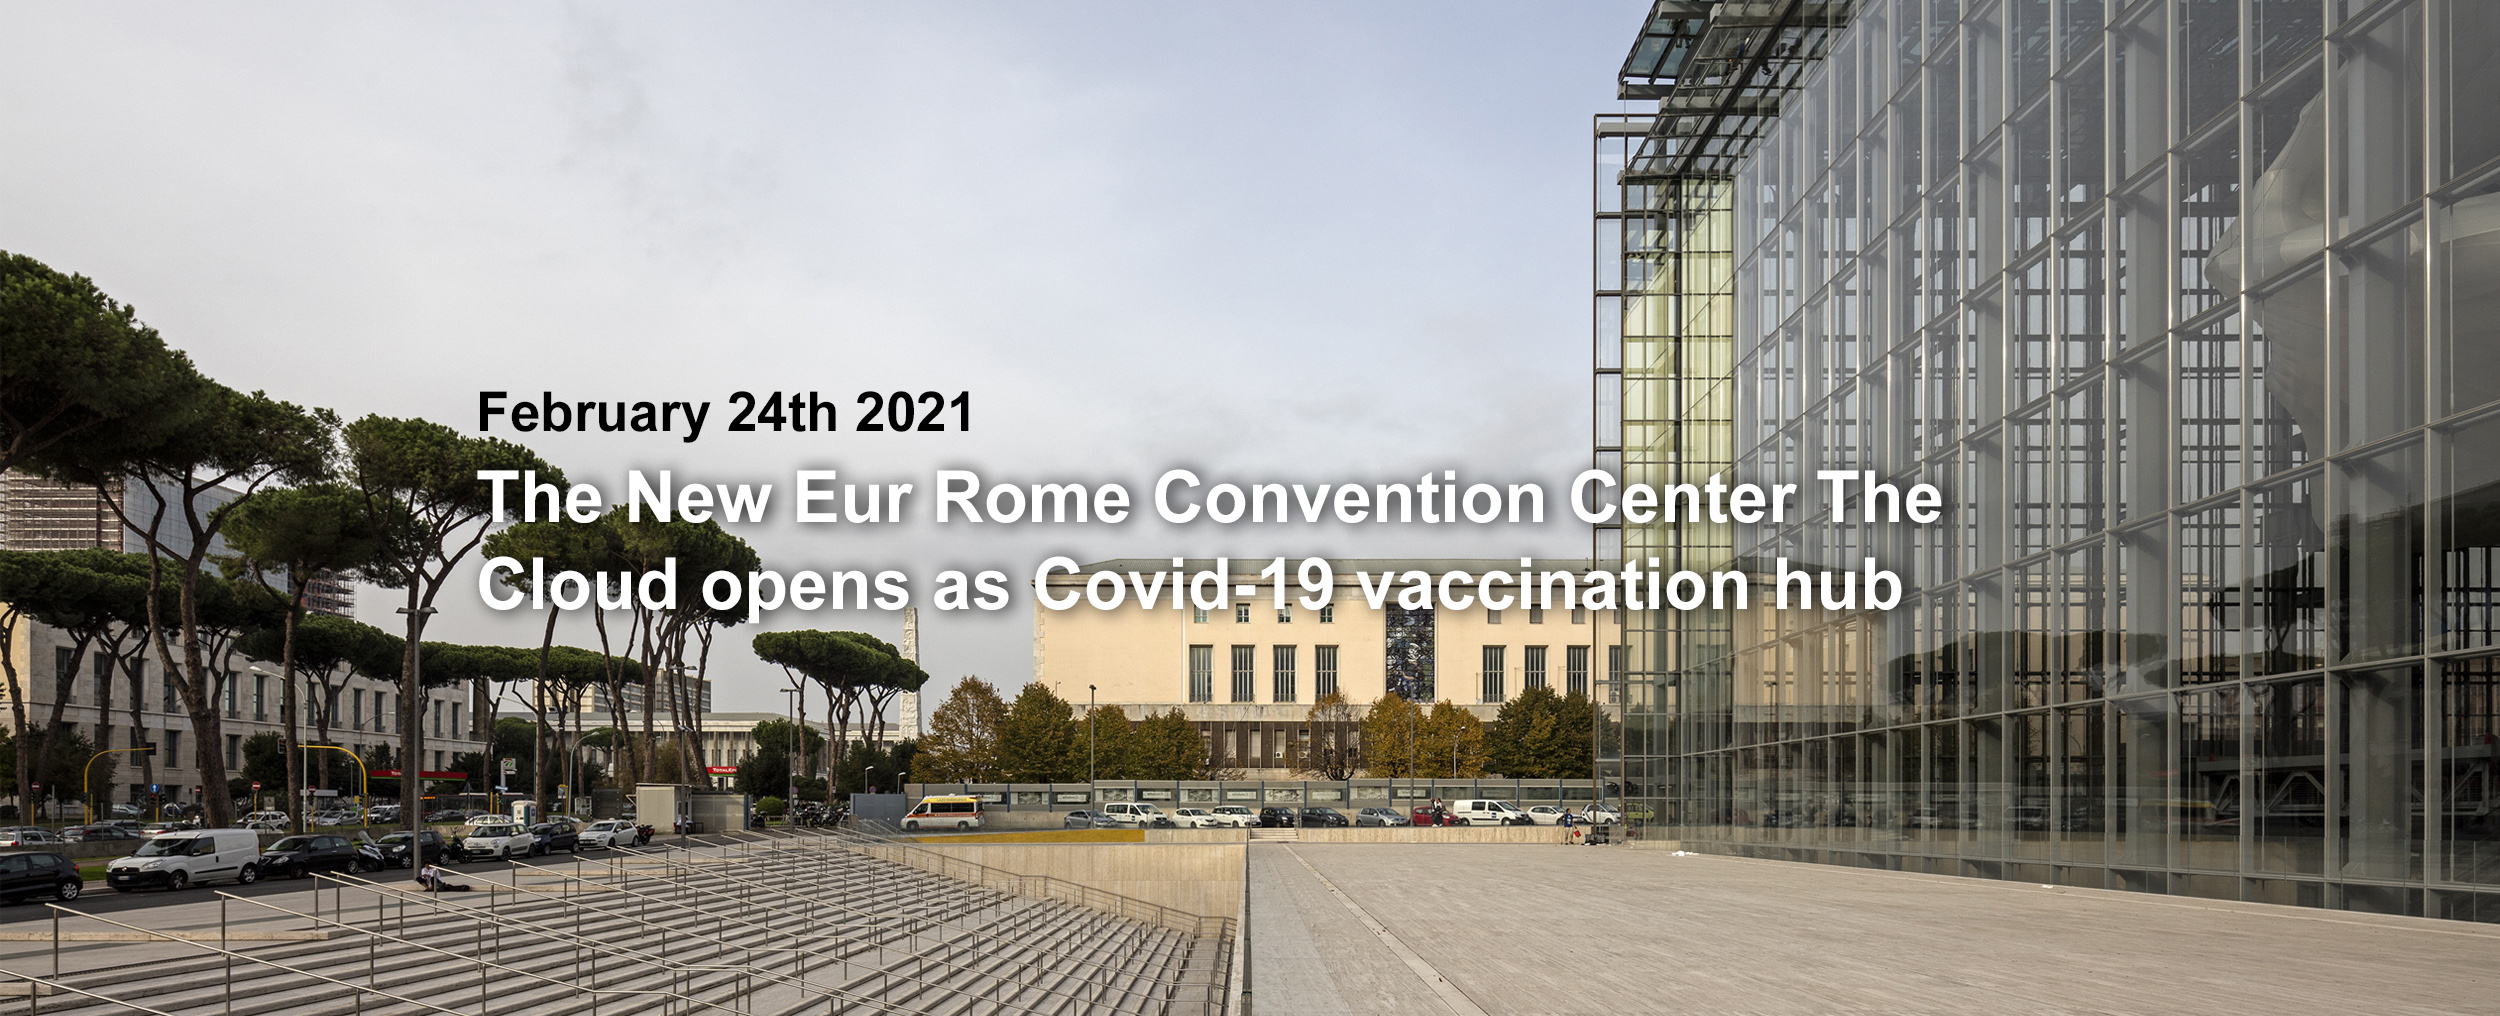 The Cloud opens as Covid-19 vaccination hub2021, February 23